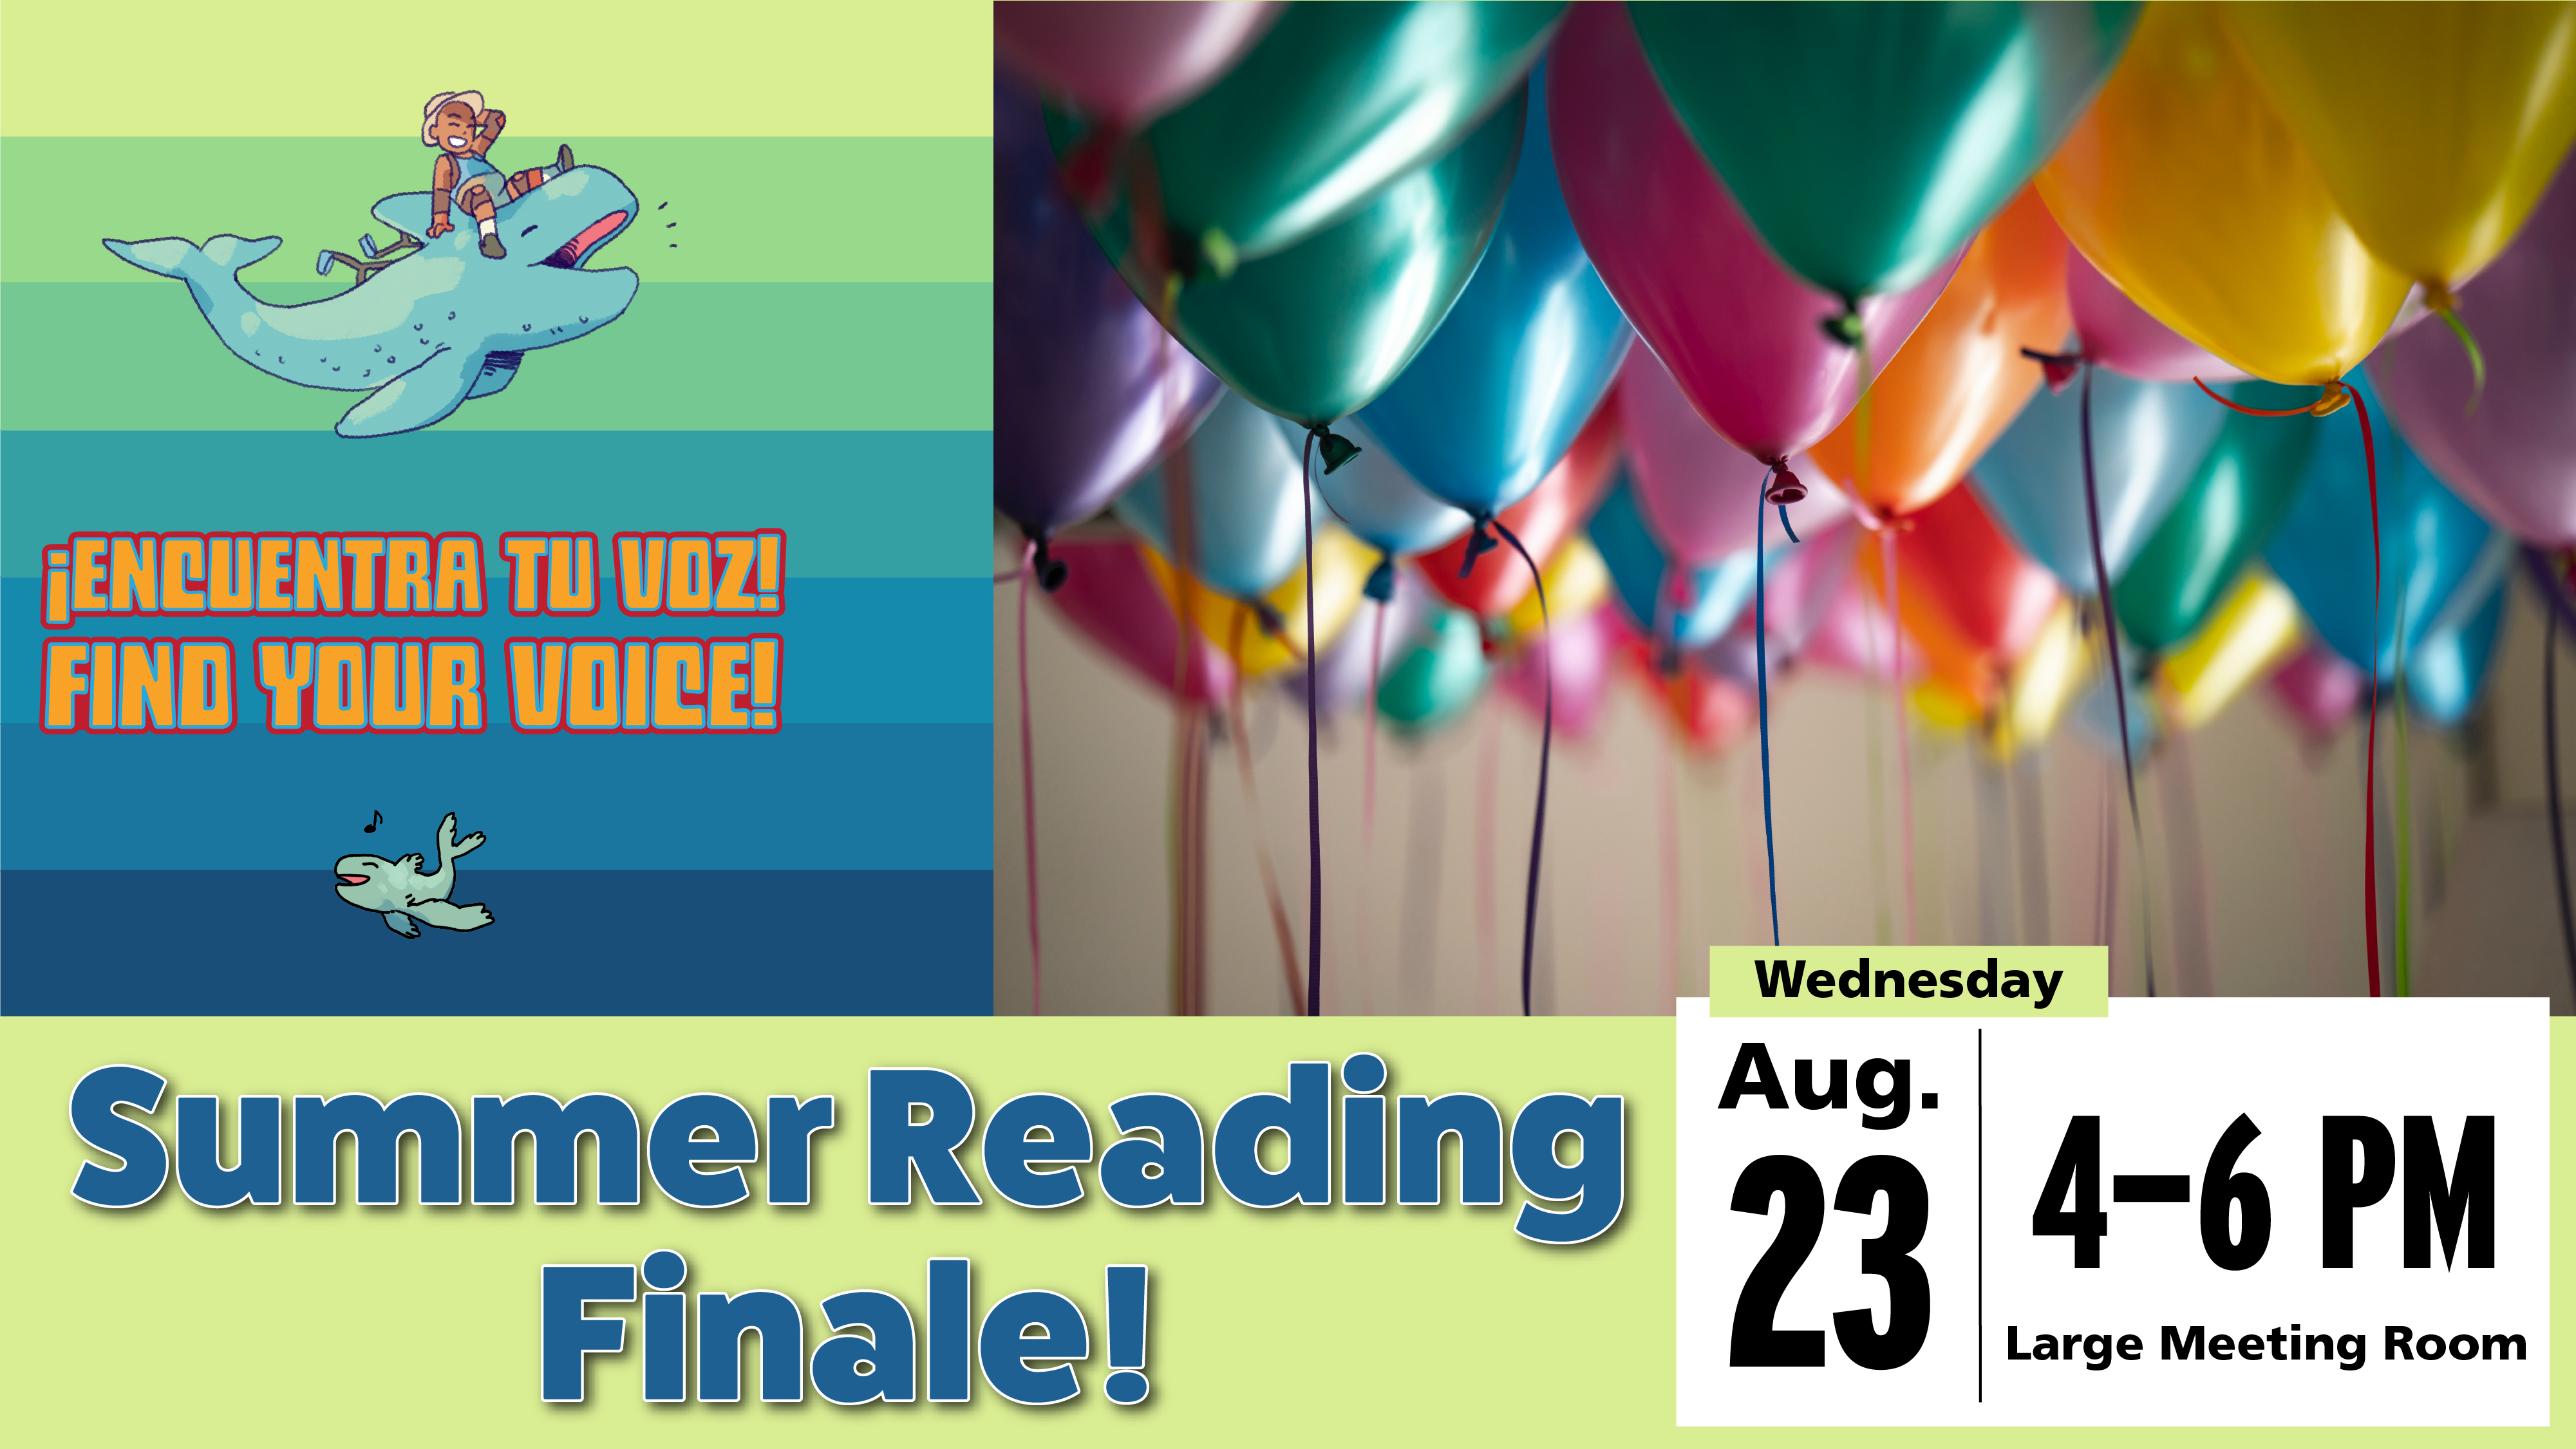 Summer Reading Finale, August 23 from 4 to 6 PM